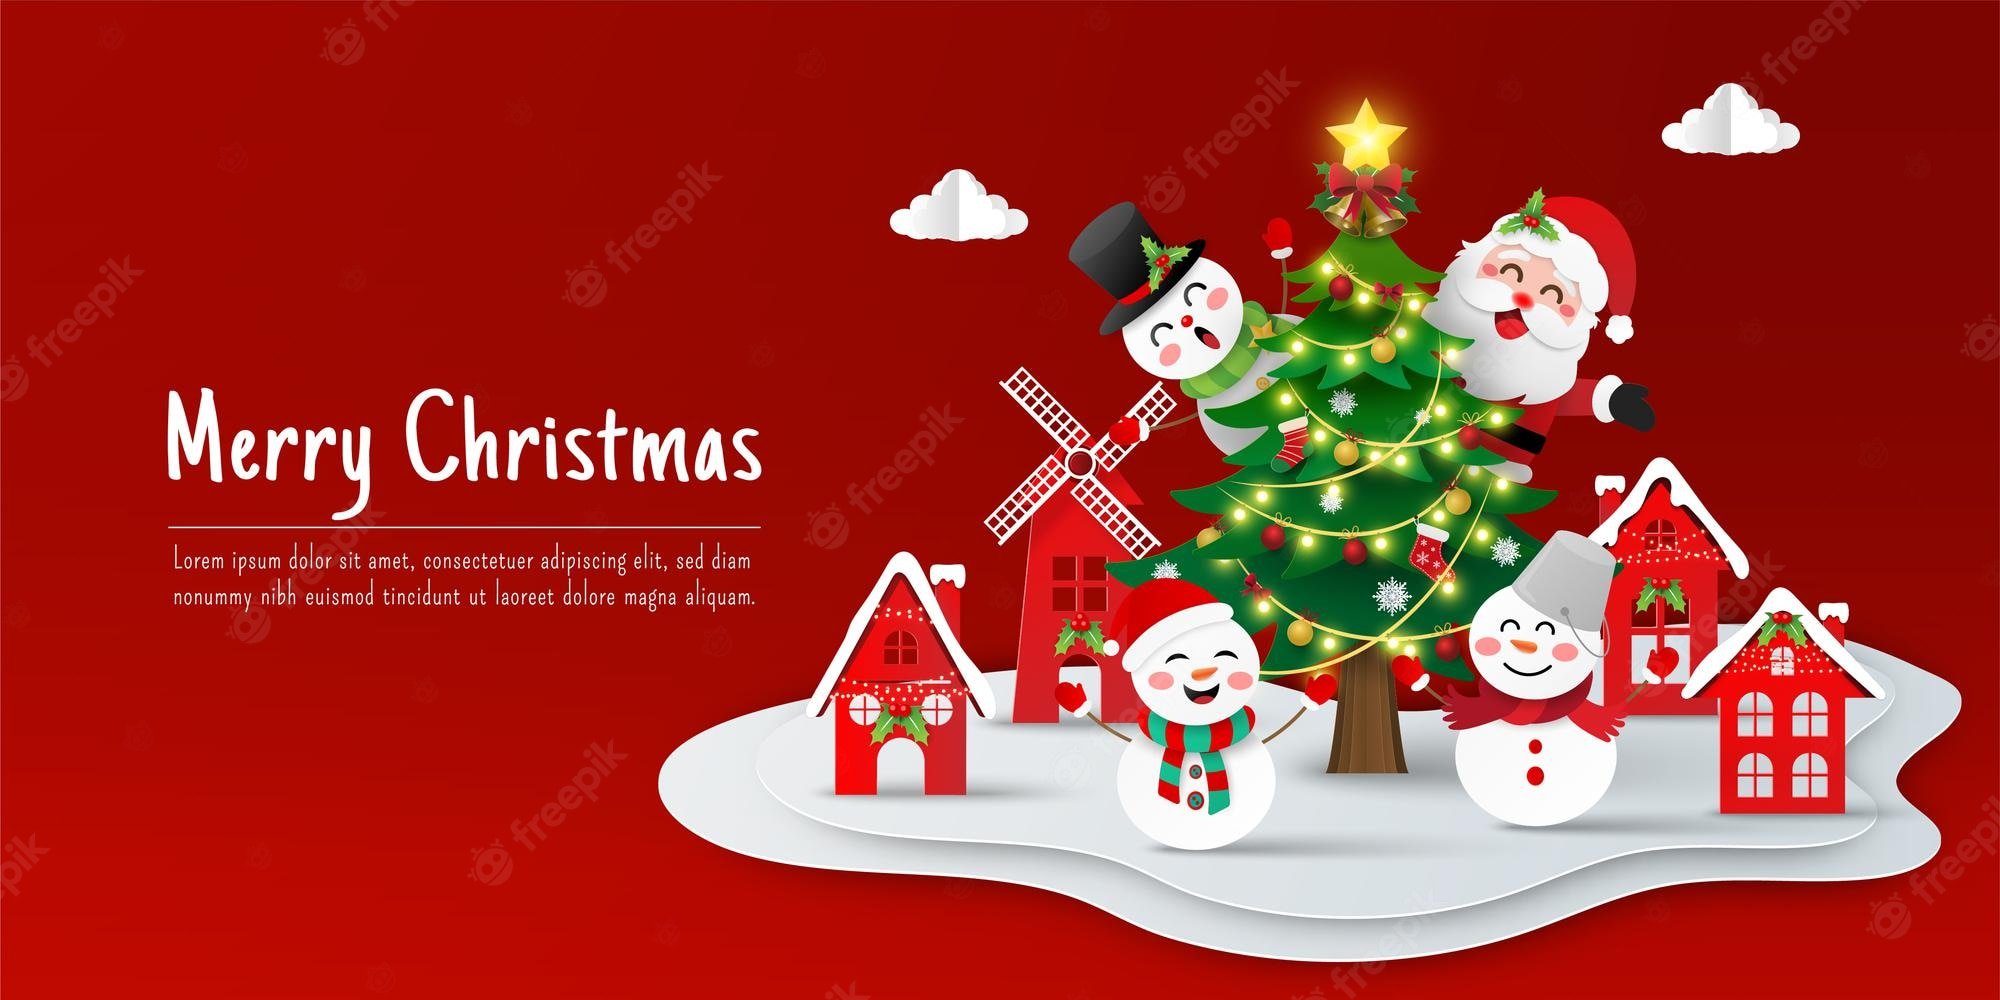 Merry christmas banner Image. Free Vectors, & PSD